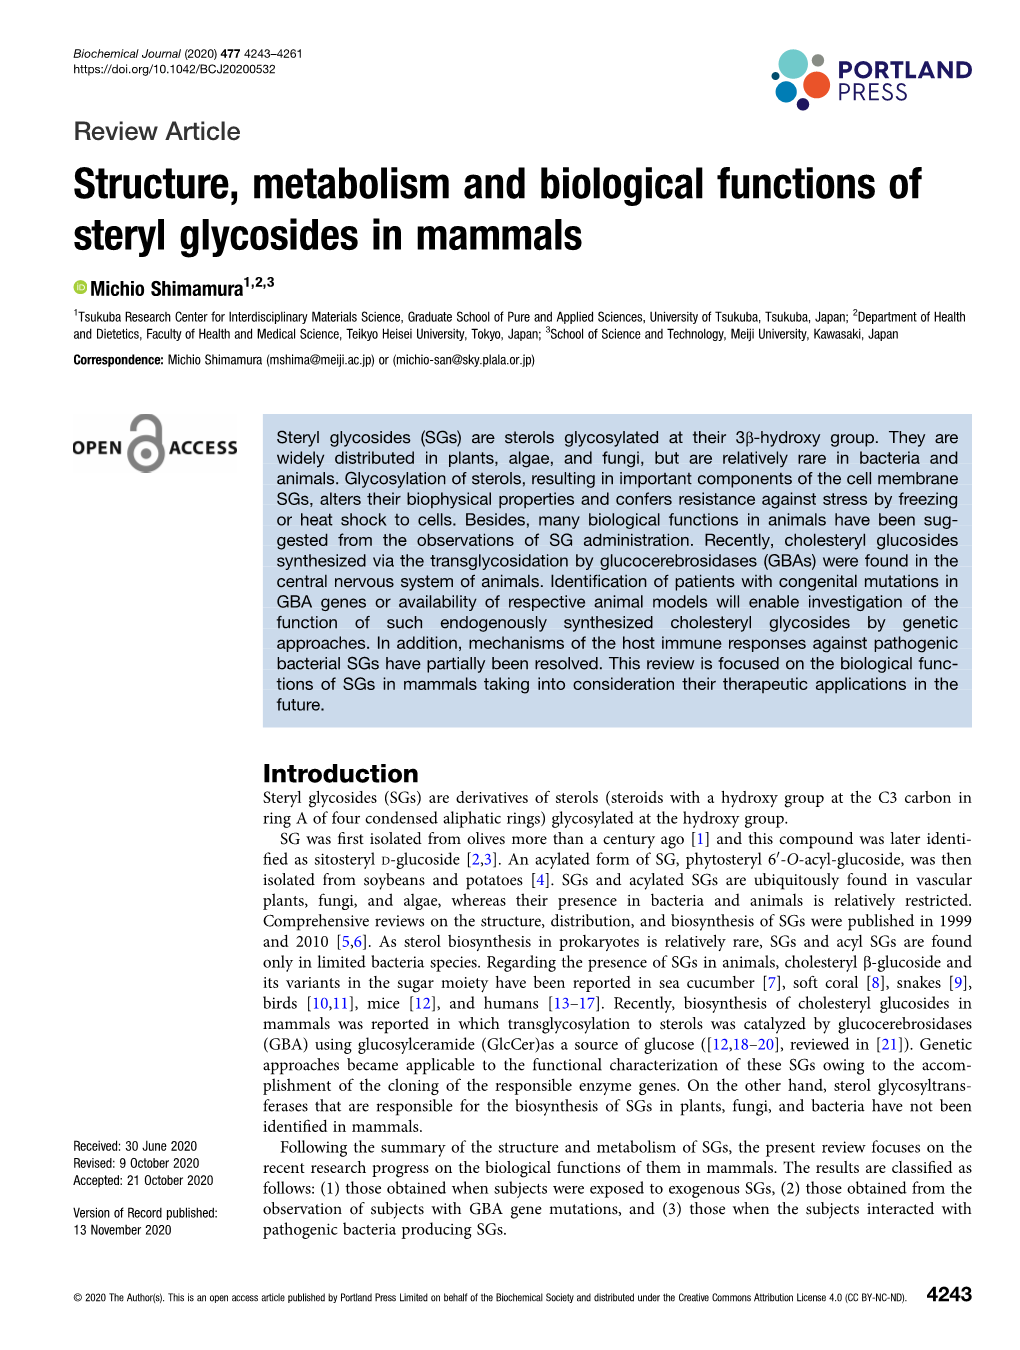 Structure, Metabolism and Biological Functions of Steryl Glycosides in Mammals